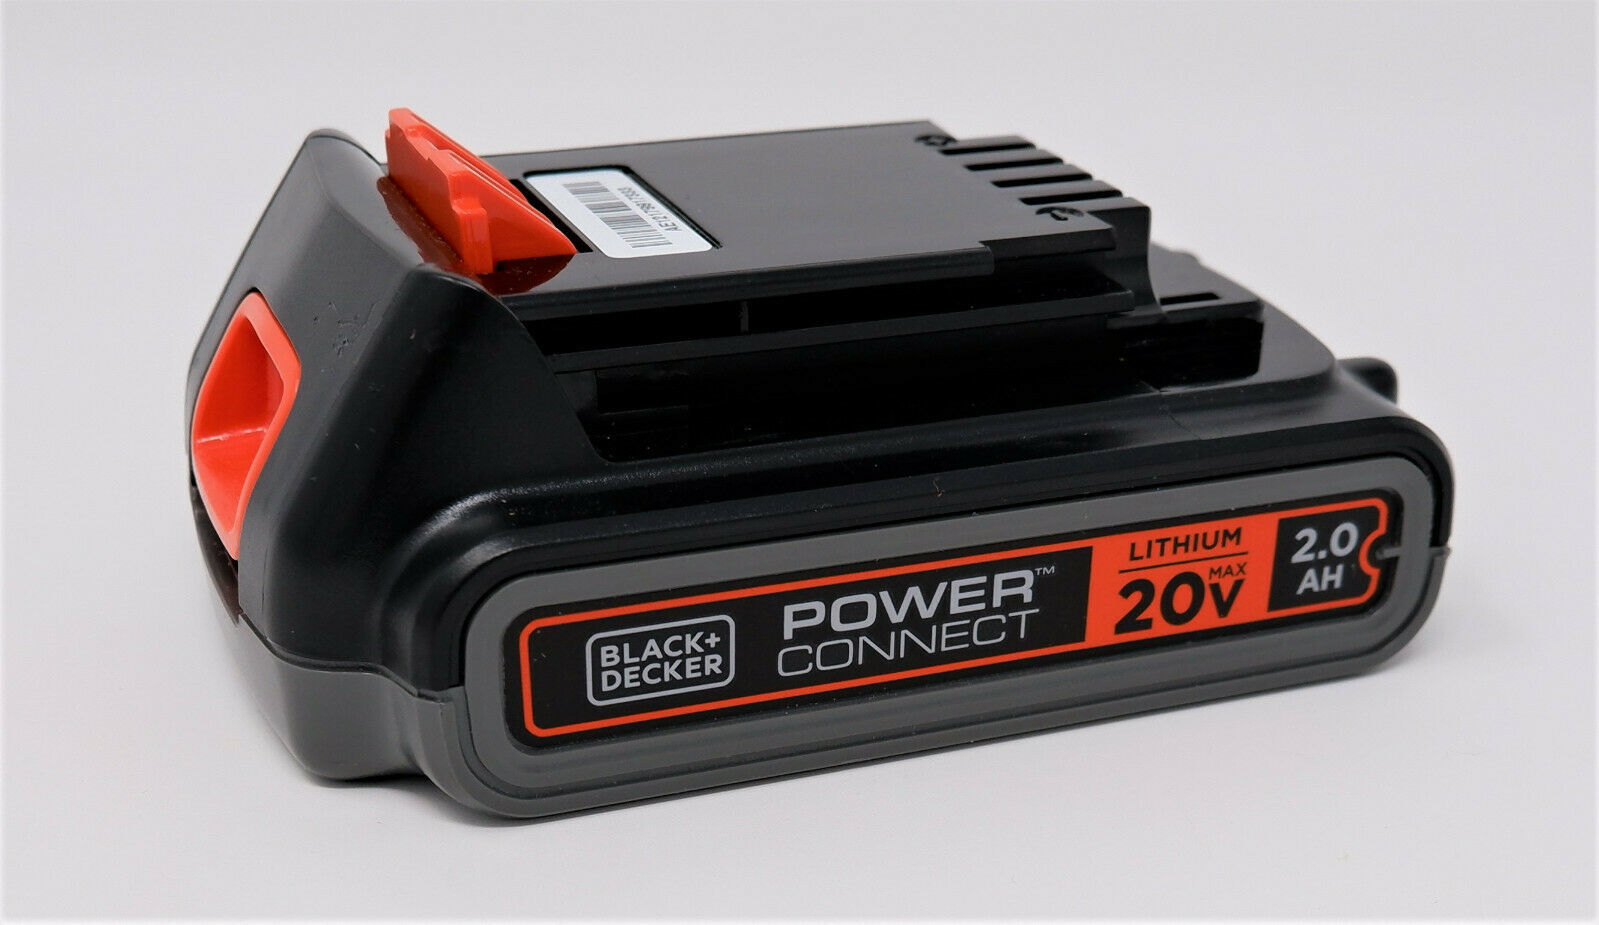 Primary image for BLACK AND DECKER LBXR2020 20V 20 VOLT LITHIUM ION BATTERY 2.0AH 40WH - NEW!